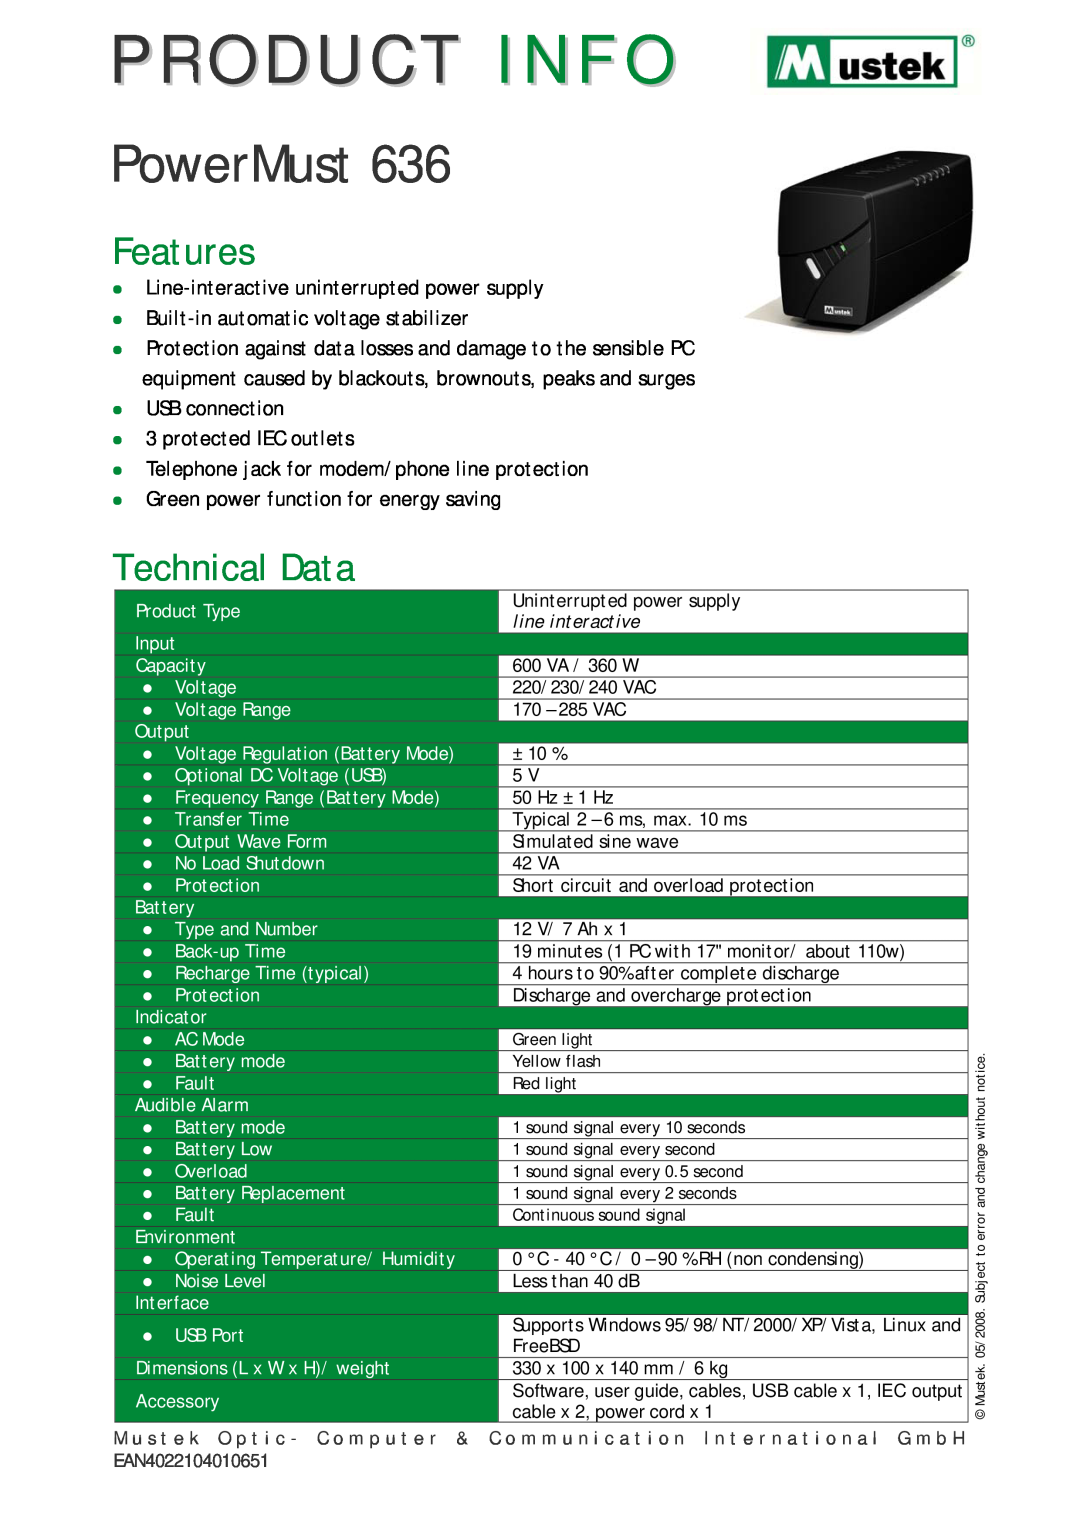 Mustek 636 dimensions Product Info, PowerMust, Features, Technical Data, z Line-interactive uninterrupted power supply 